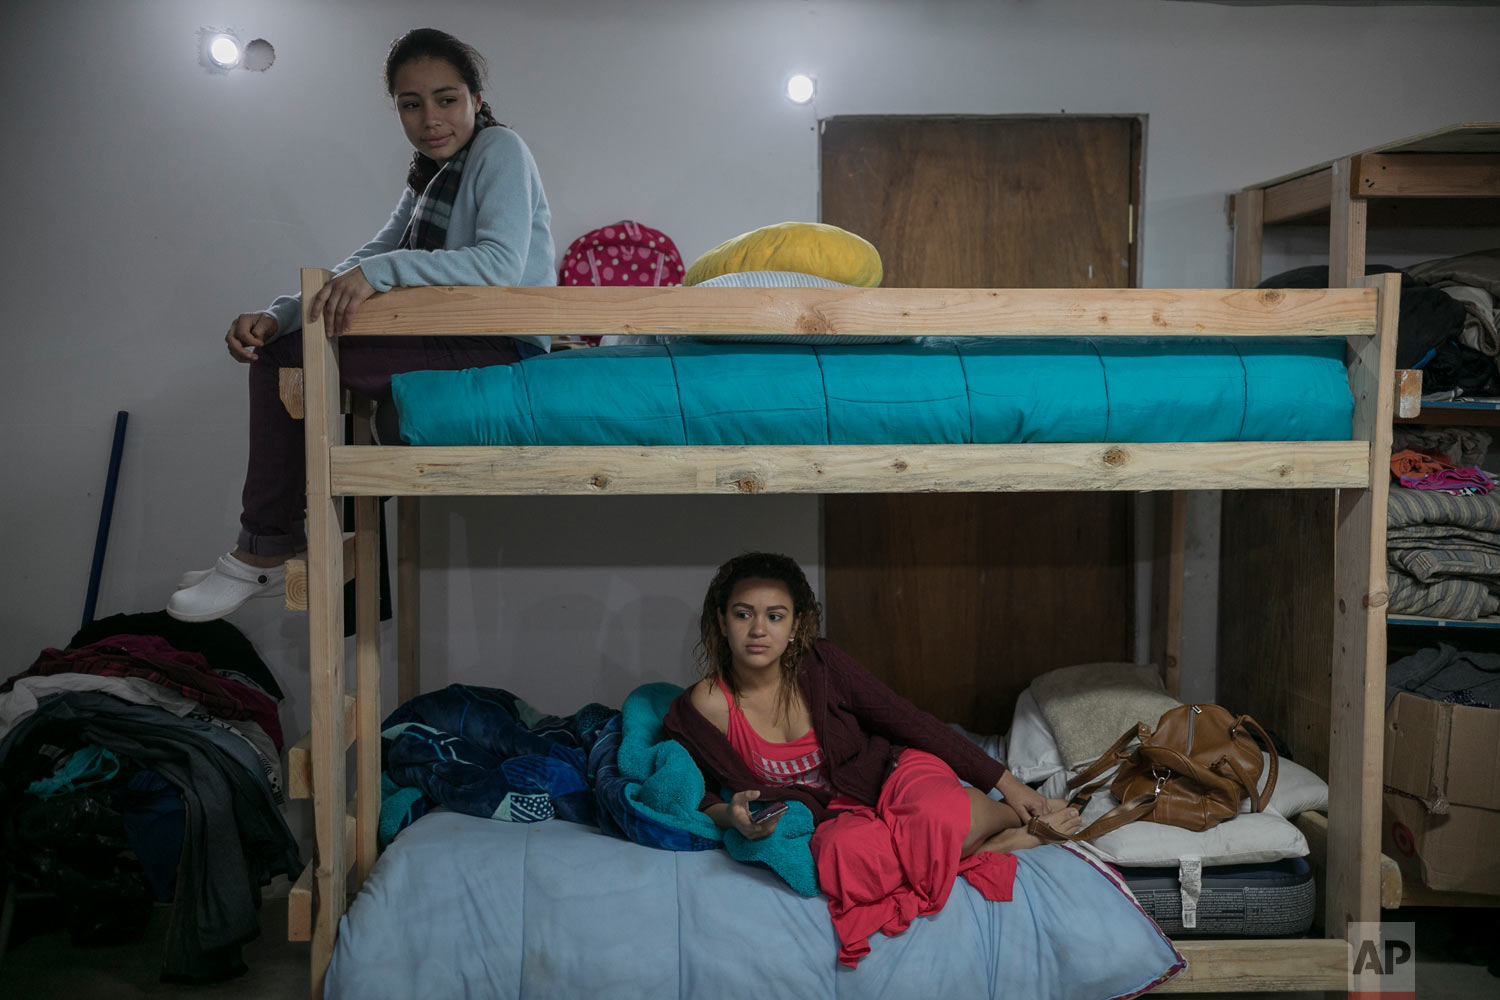  EL Salvador migrant Xiomara, 13, sits atop the bunk bed she shares with 18-year-old Valeria Ramos of Honduras, at the Agape World Mission shelter in Tijuana, Mexico, Feb. 4, 2019. (AP Photo/Emilio Espejel) 